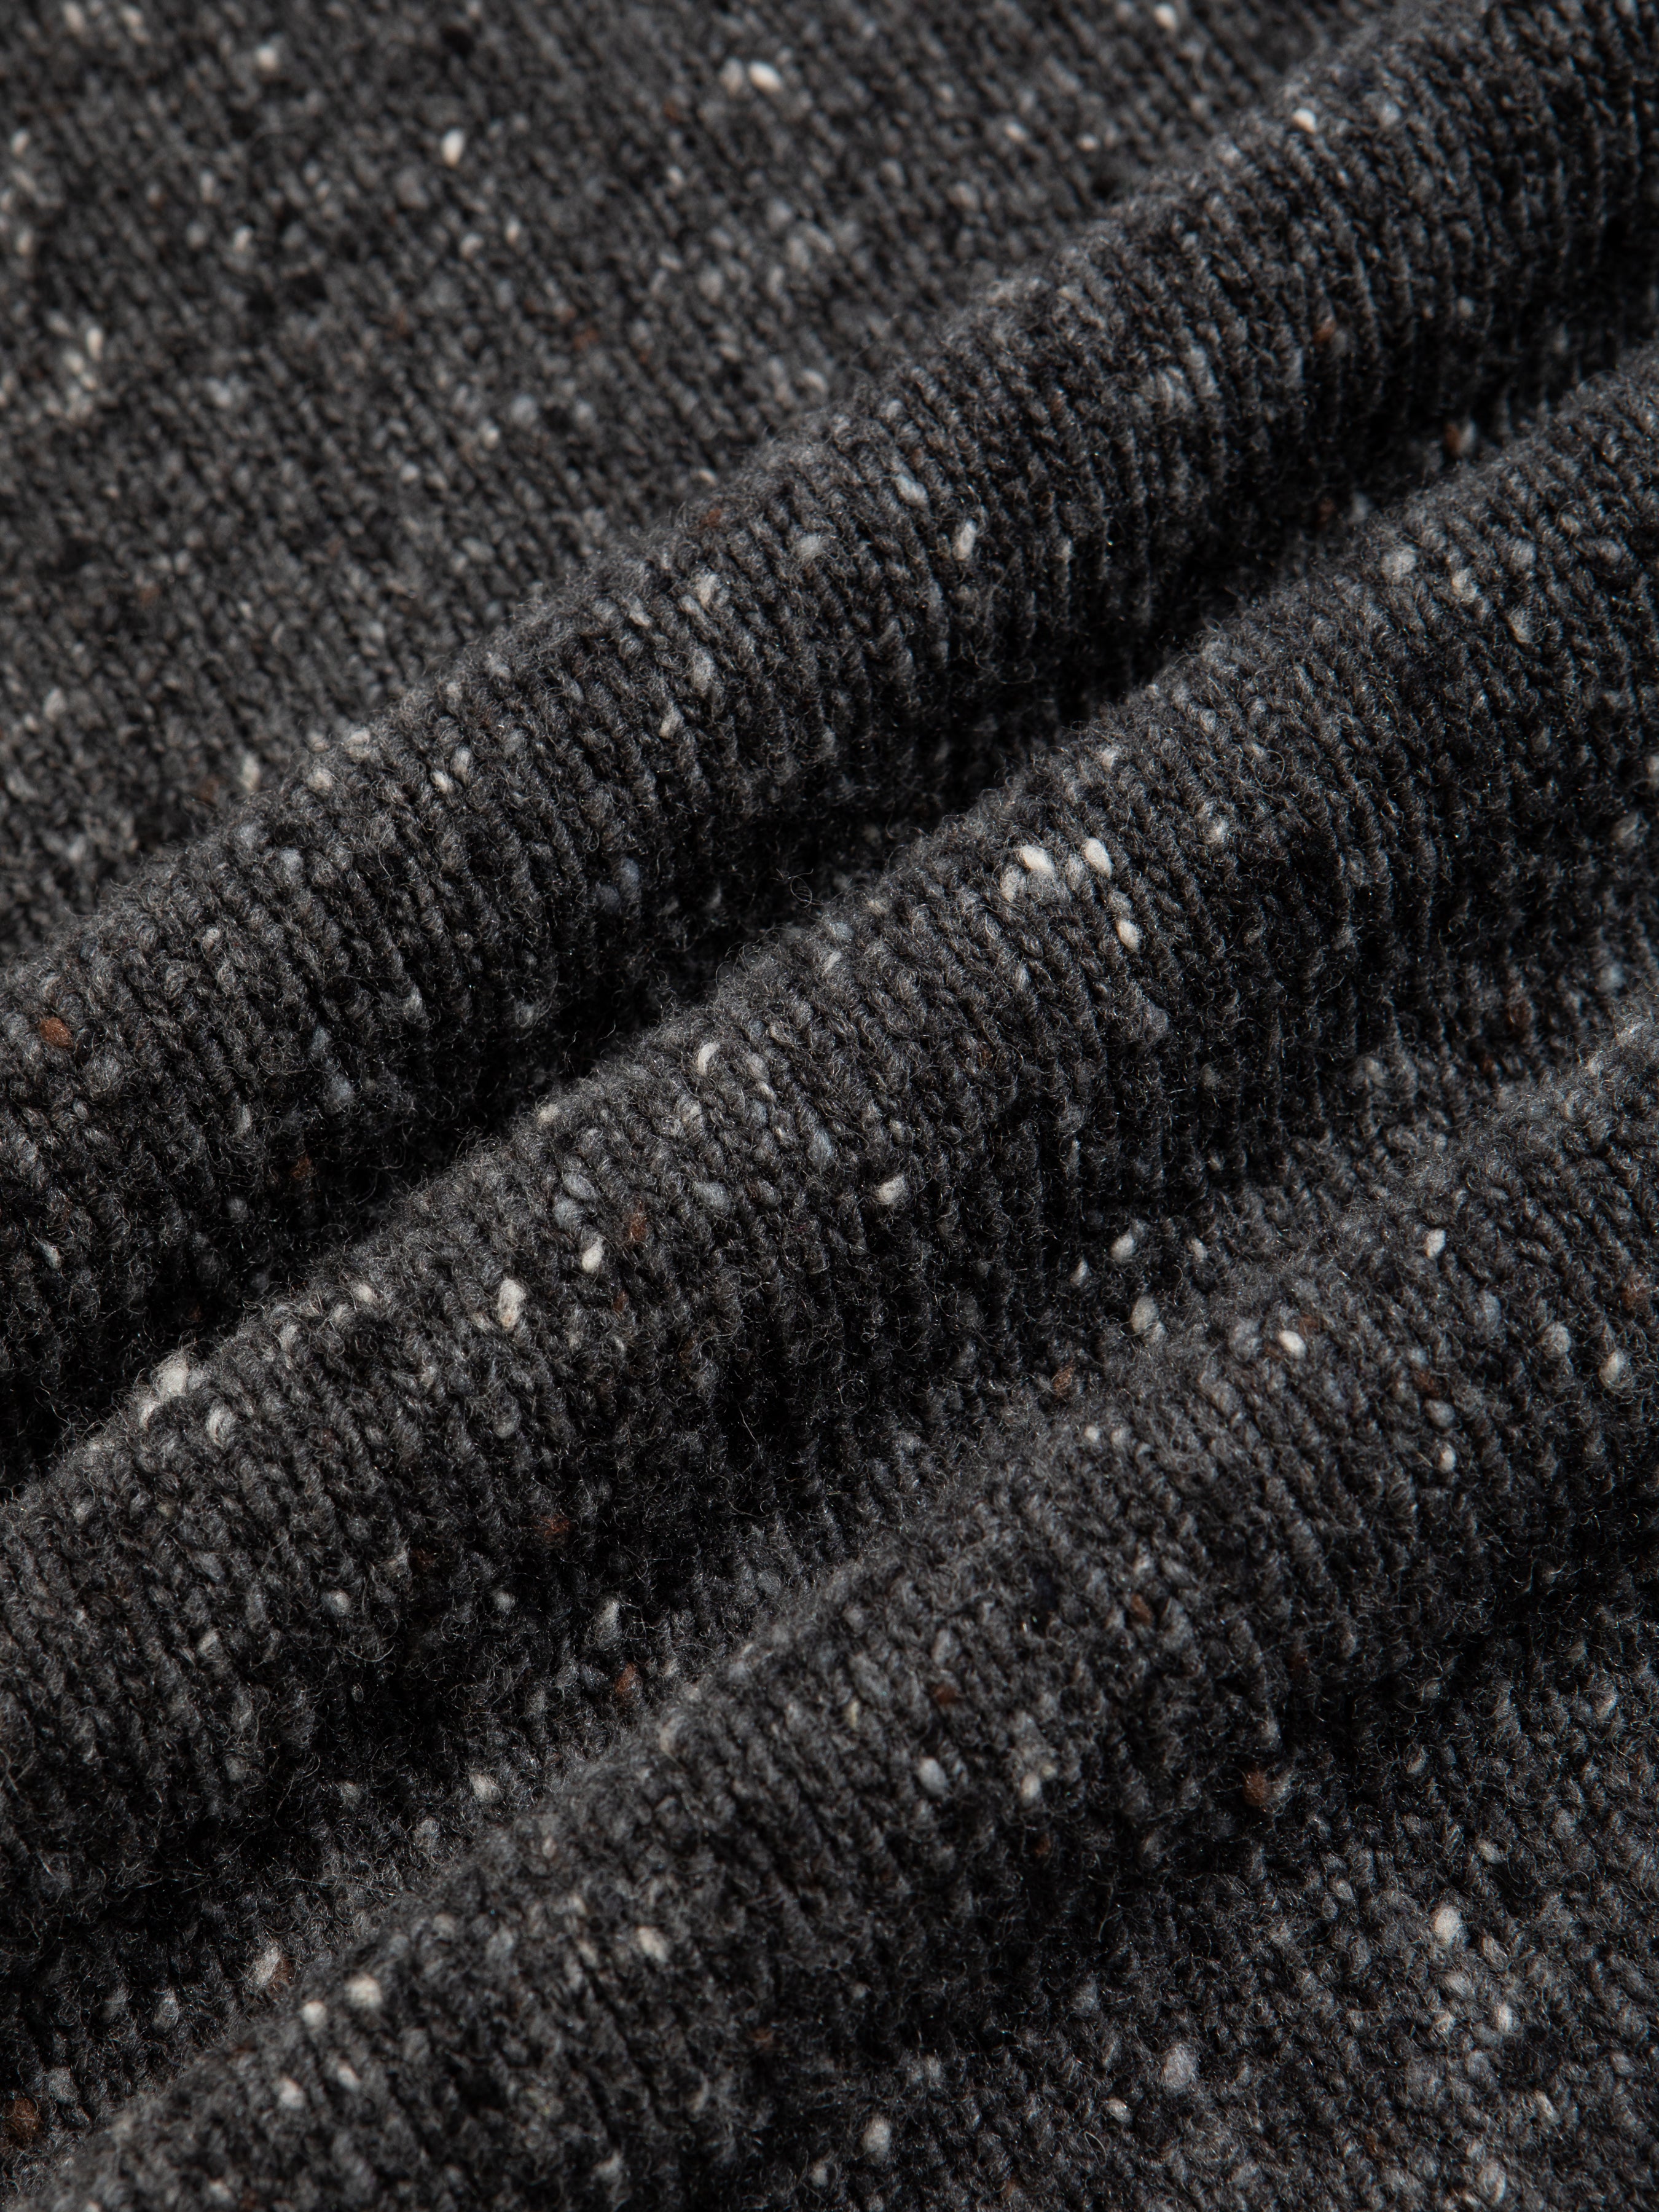 A Donegal wool material, spun in Ireland in a charcoal grey material.